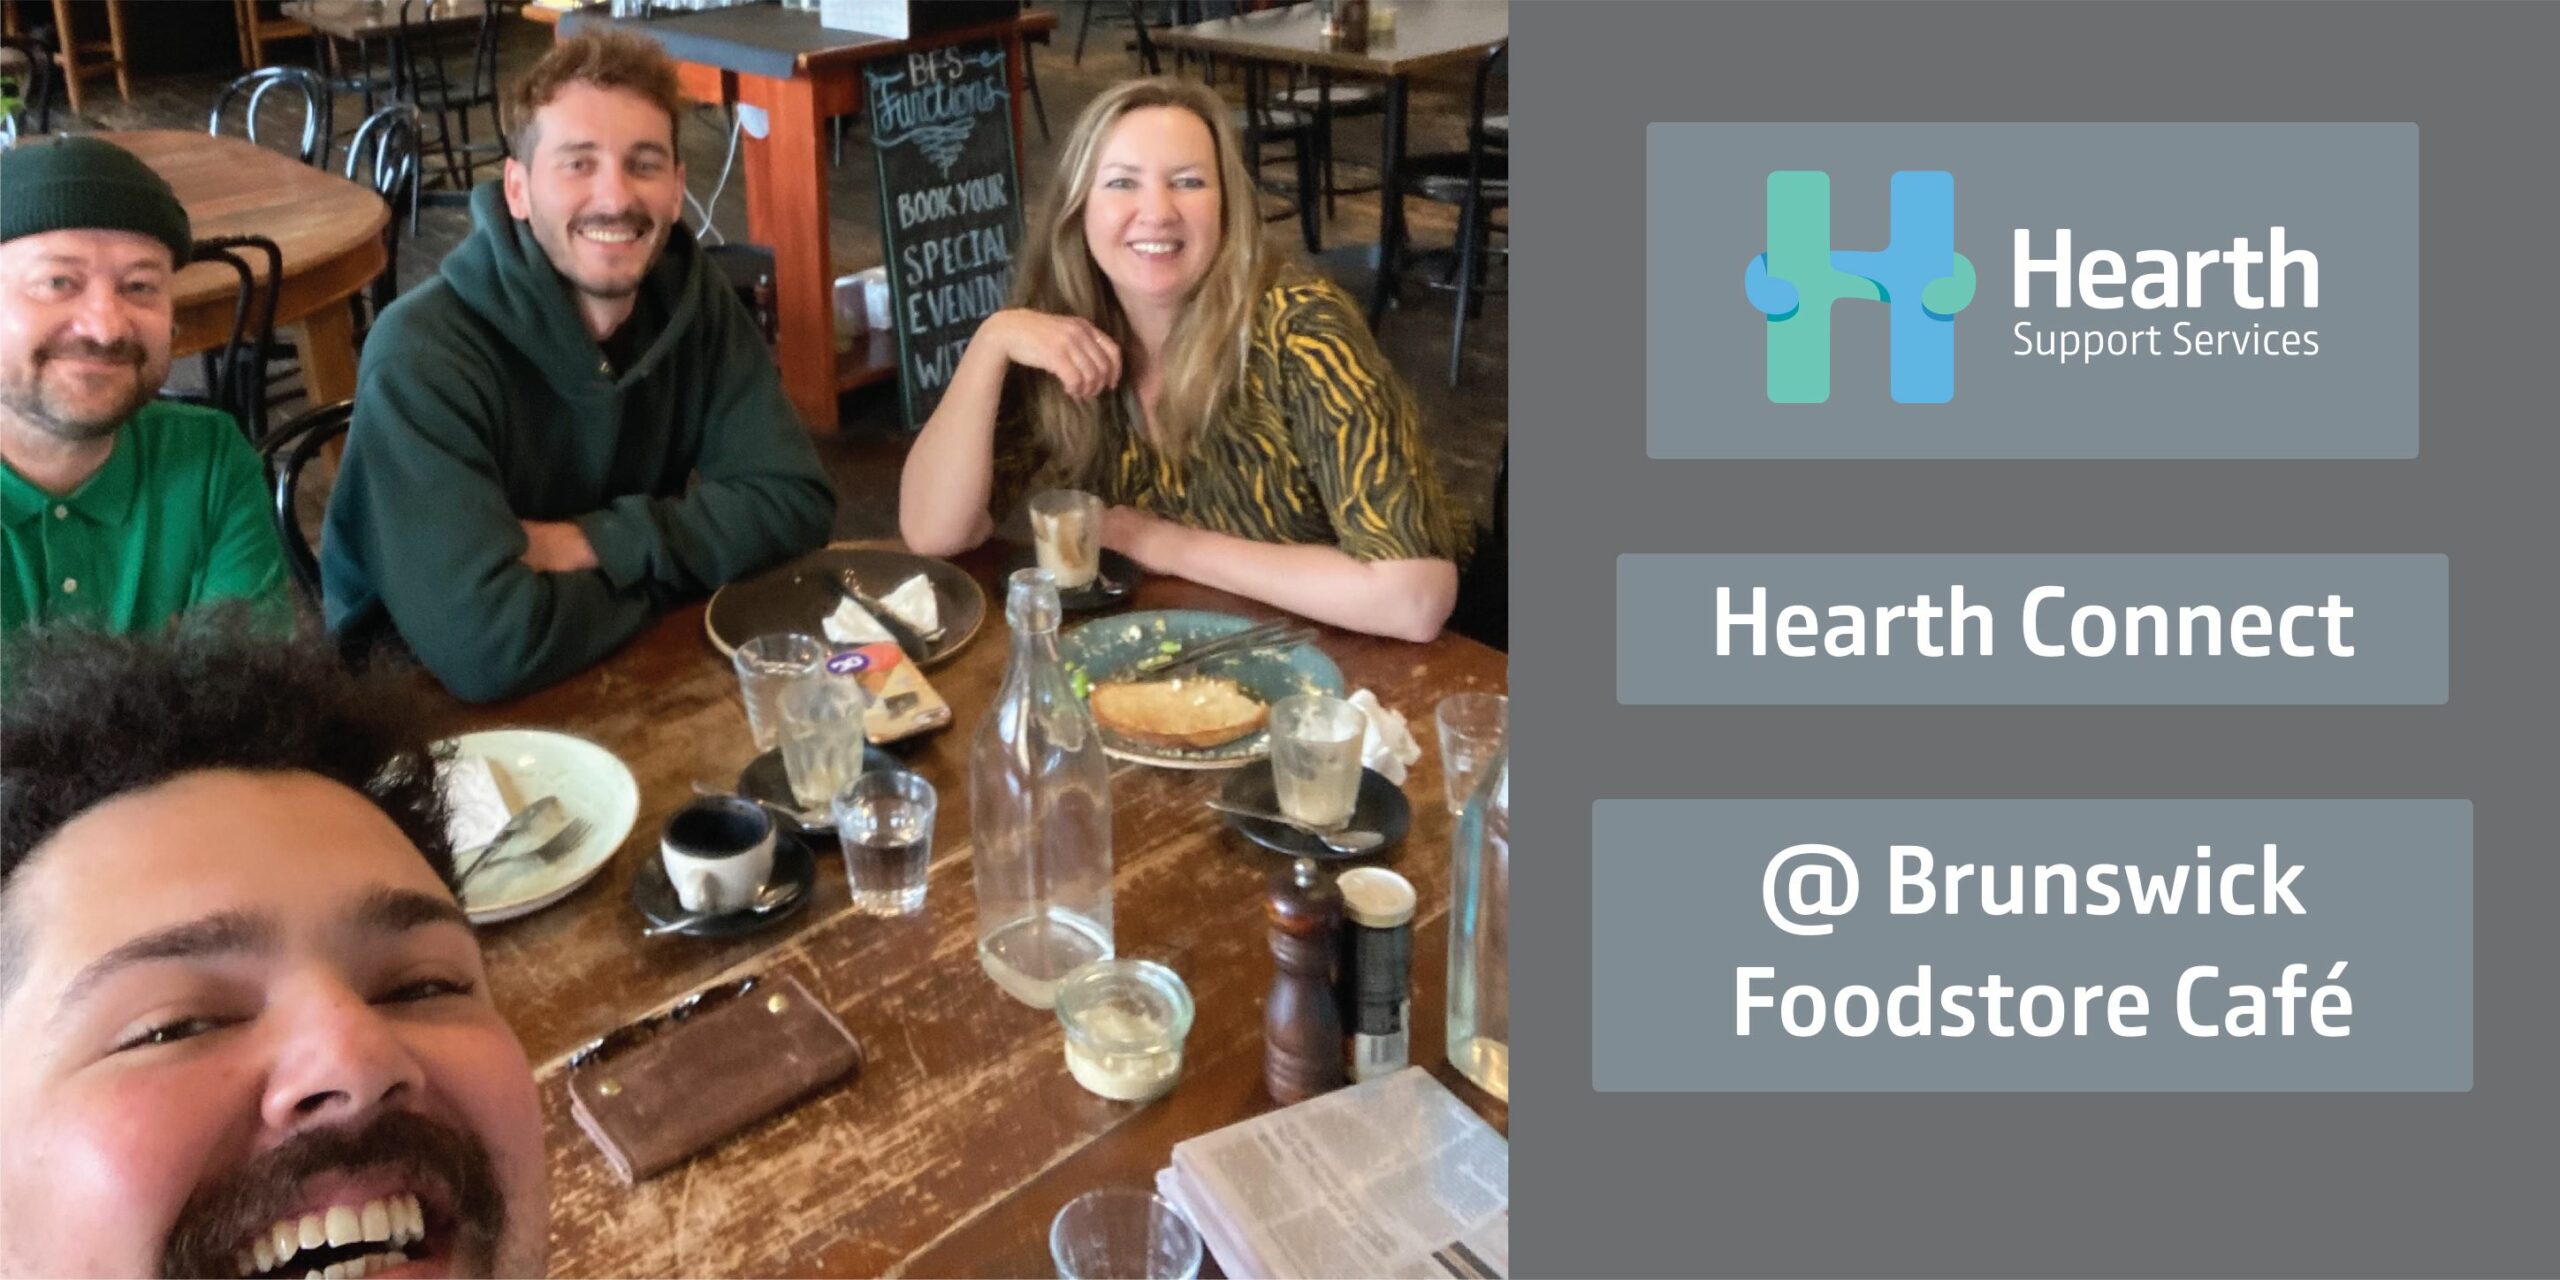 Hearth Support Services Hosts “Support Worker Connect” at Brunswick Foodstore Café